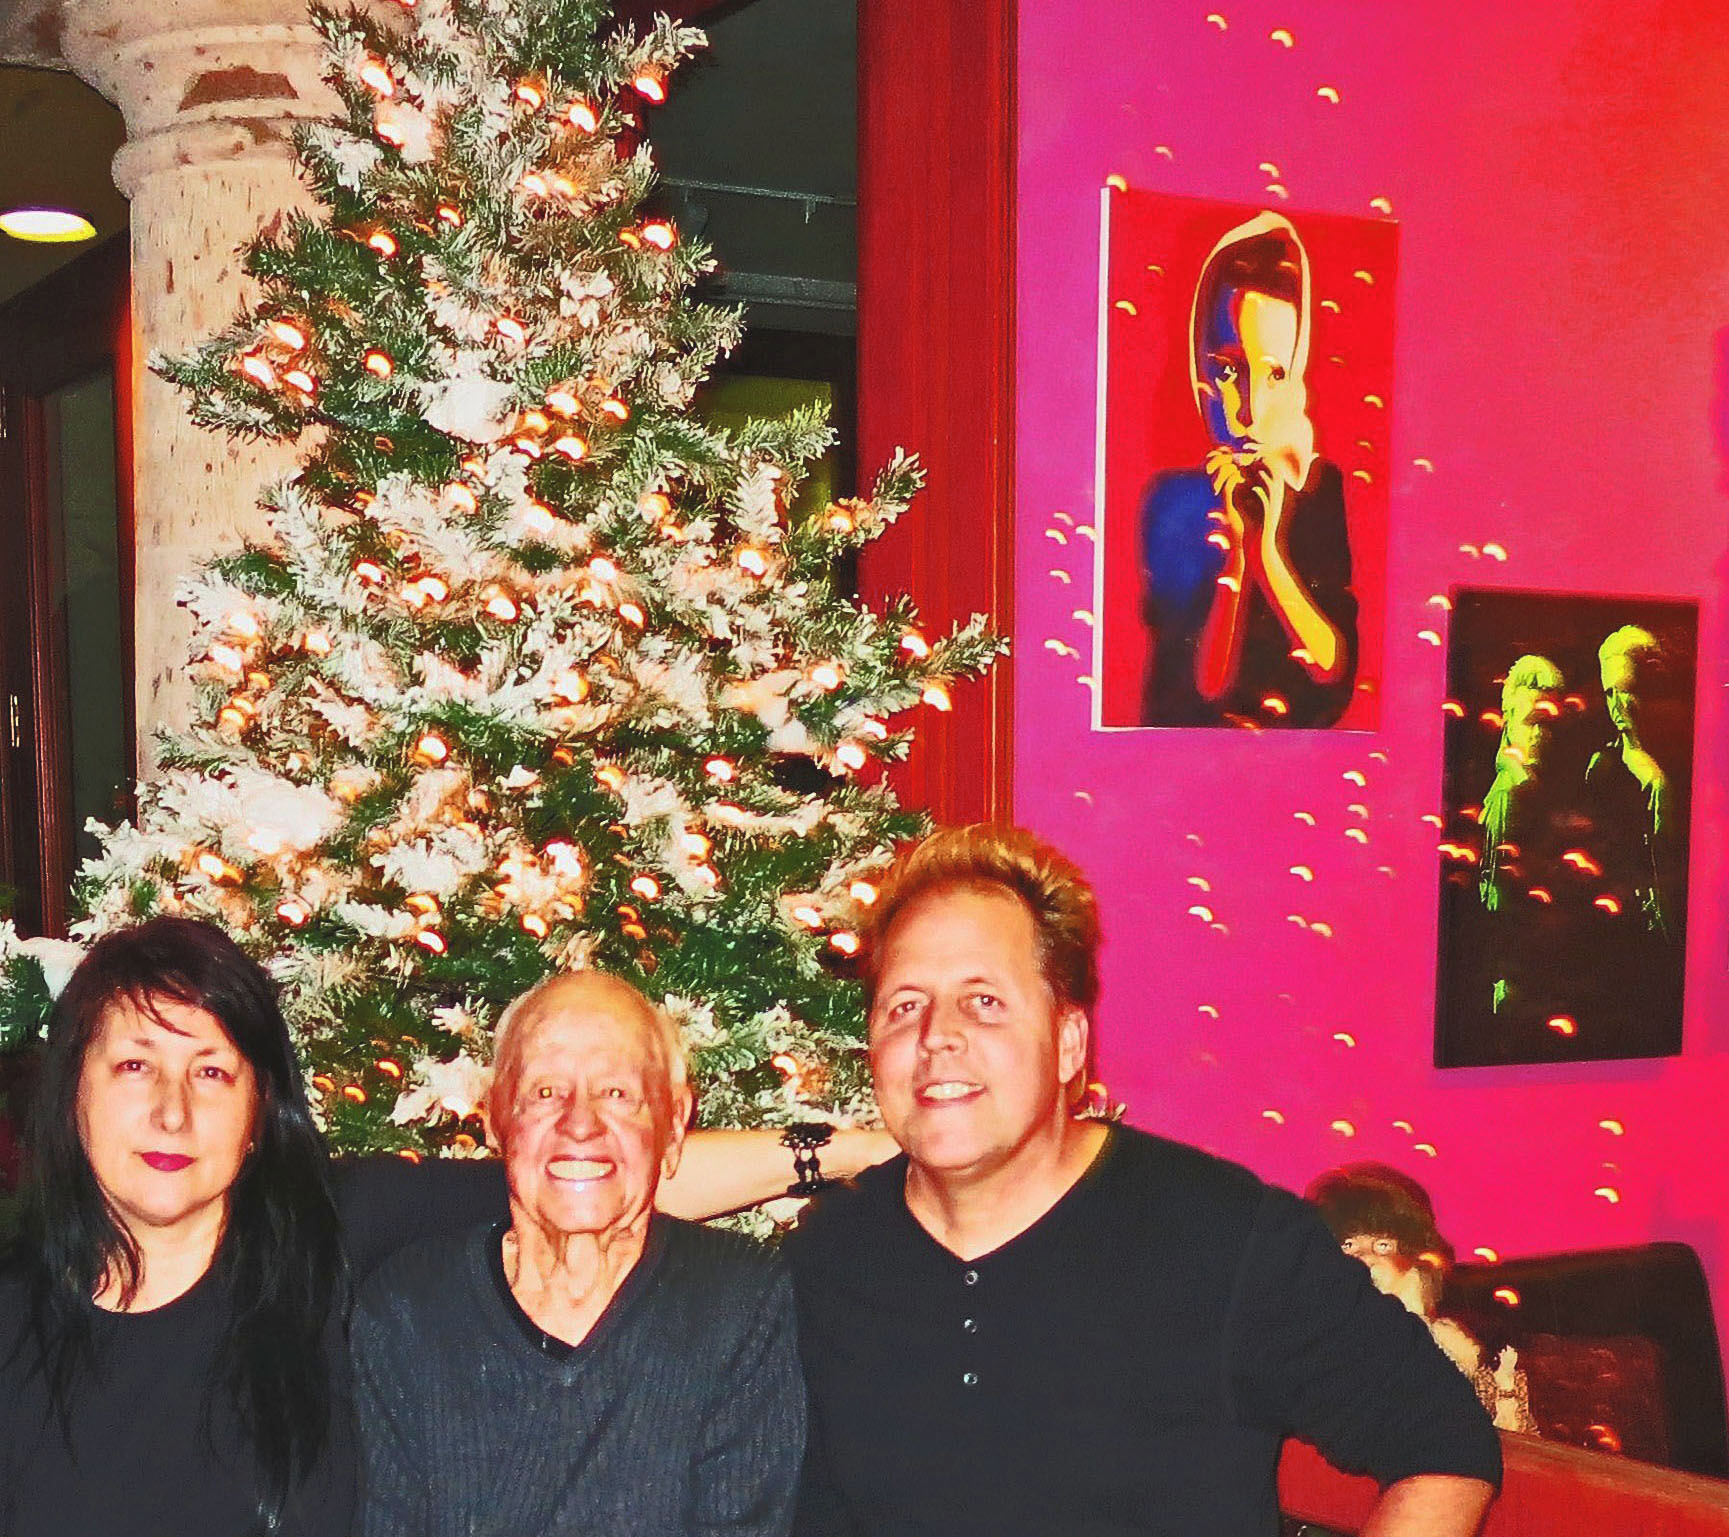 Artist Charlene Rooney with father-in-law Mickey Rooney and husband Mark Rooney. Palm Springs art exhibit Christmas 2012